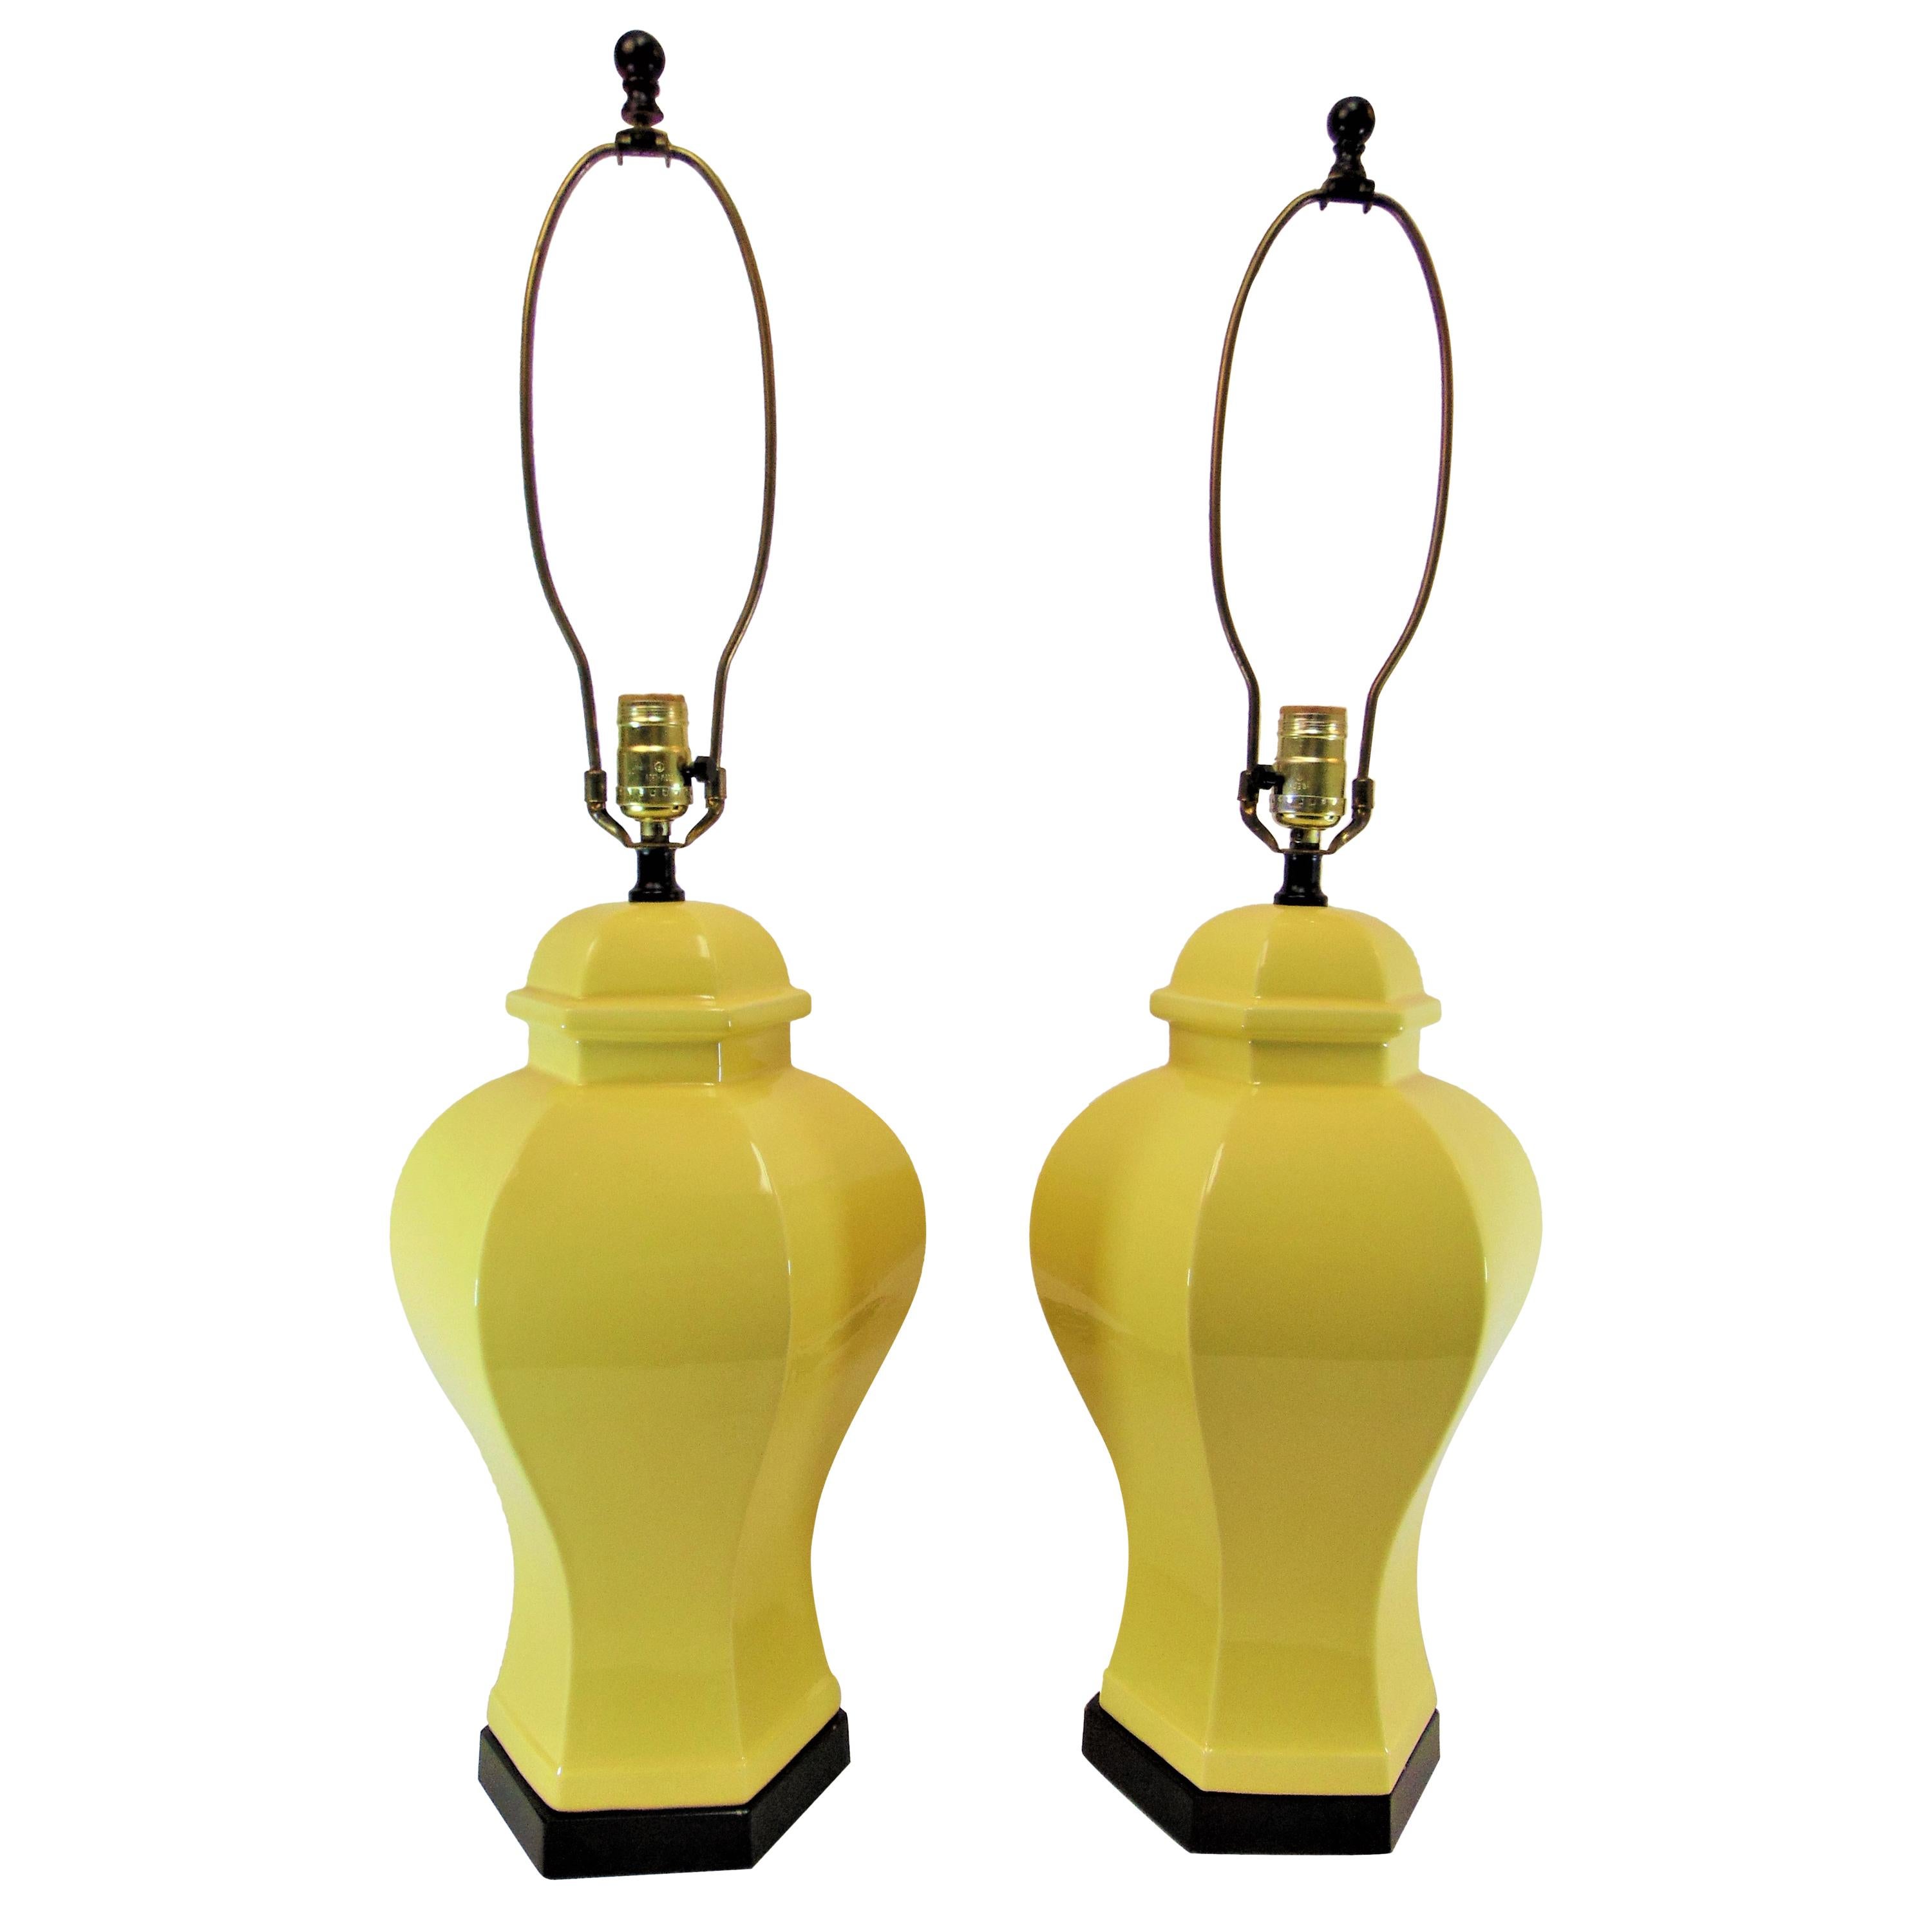 Asian Inspired Pair of Yellow Ceramic Table Lamps by Paul Hanson For Sale